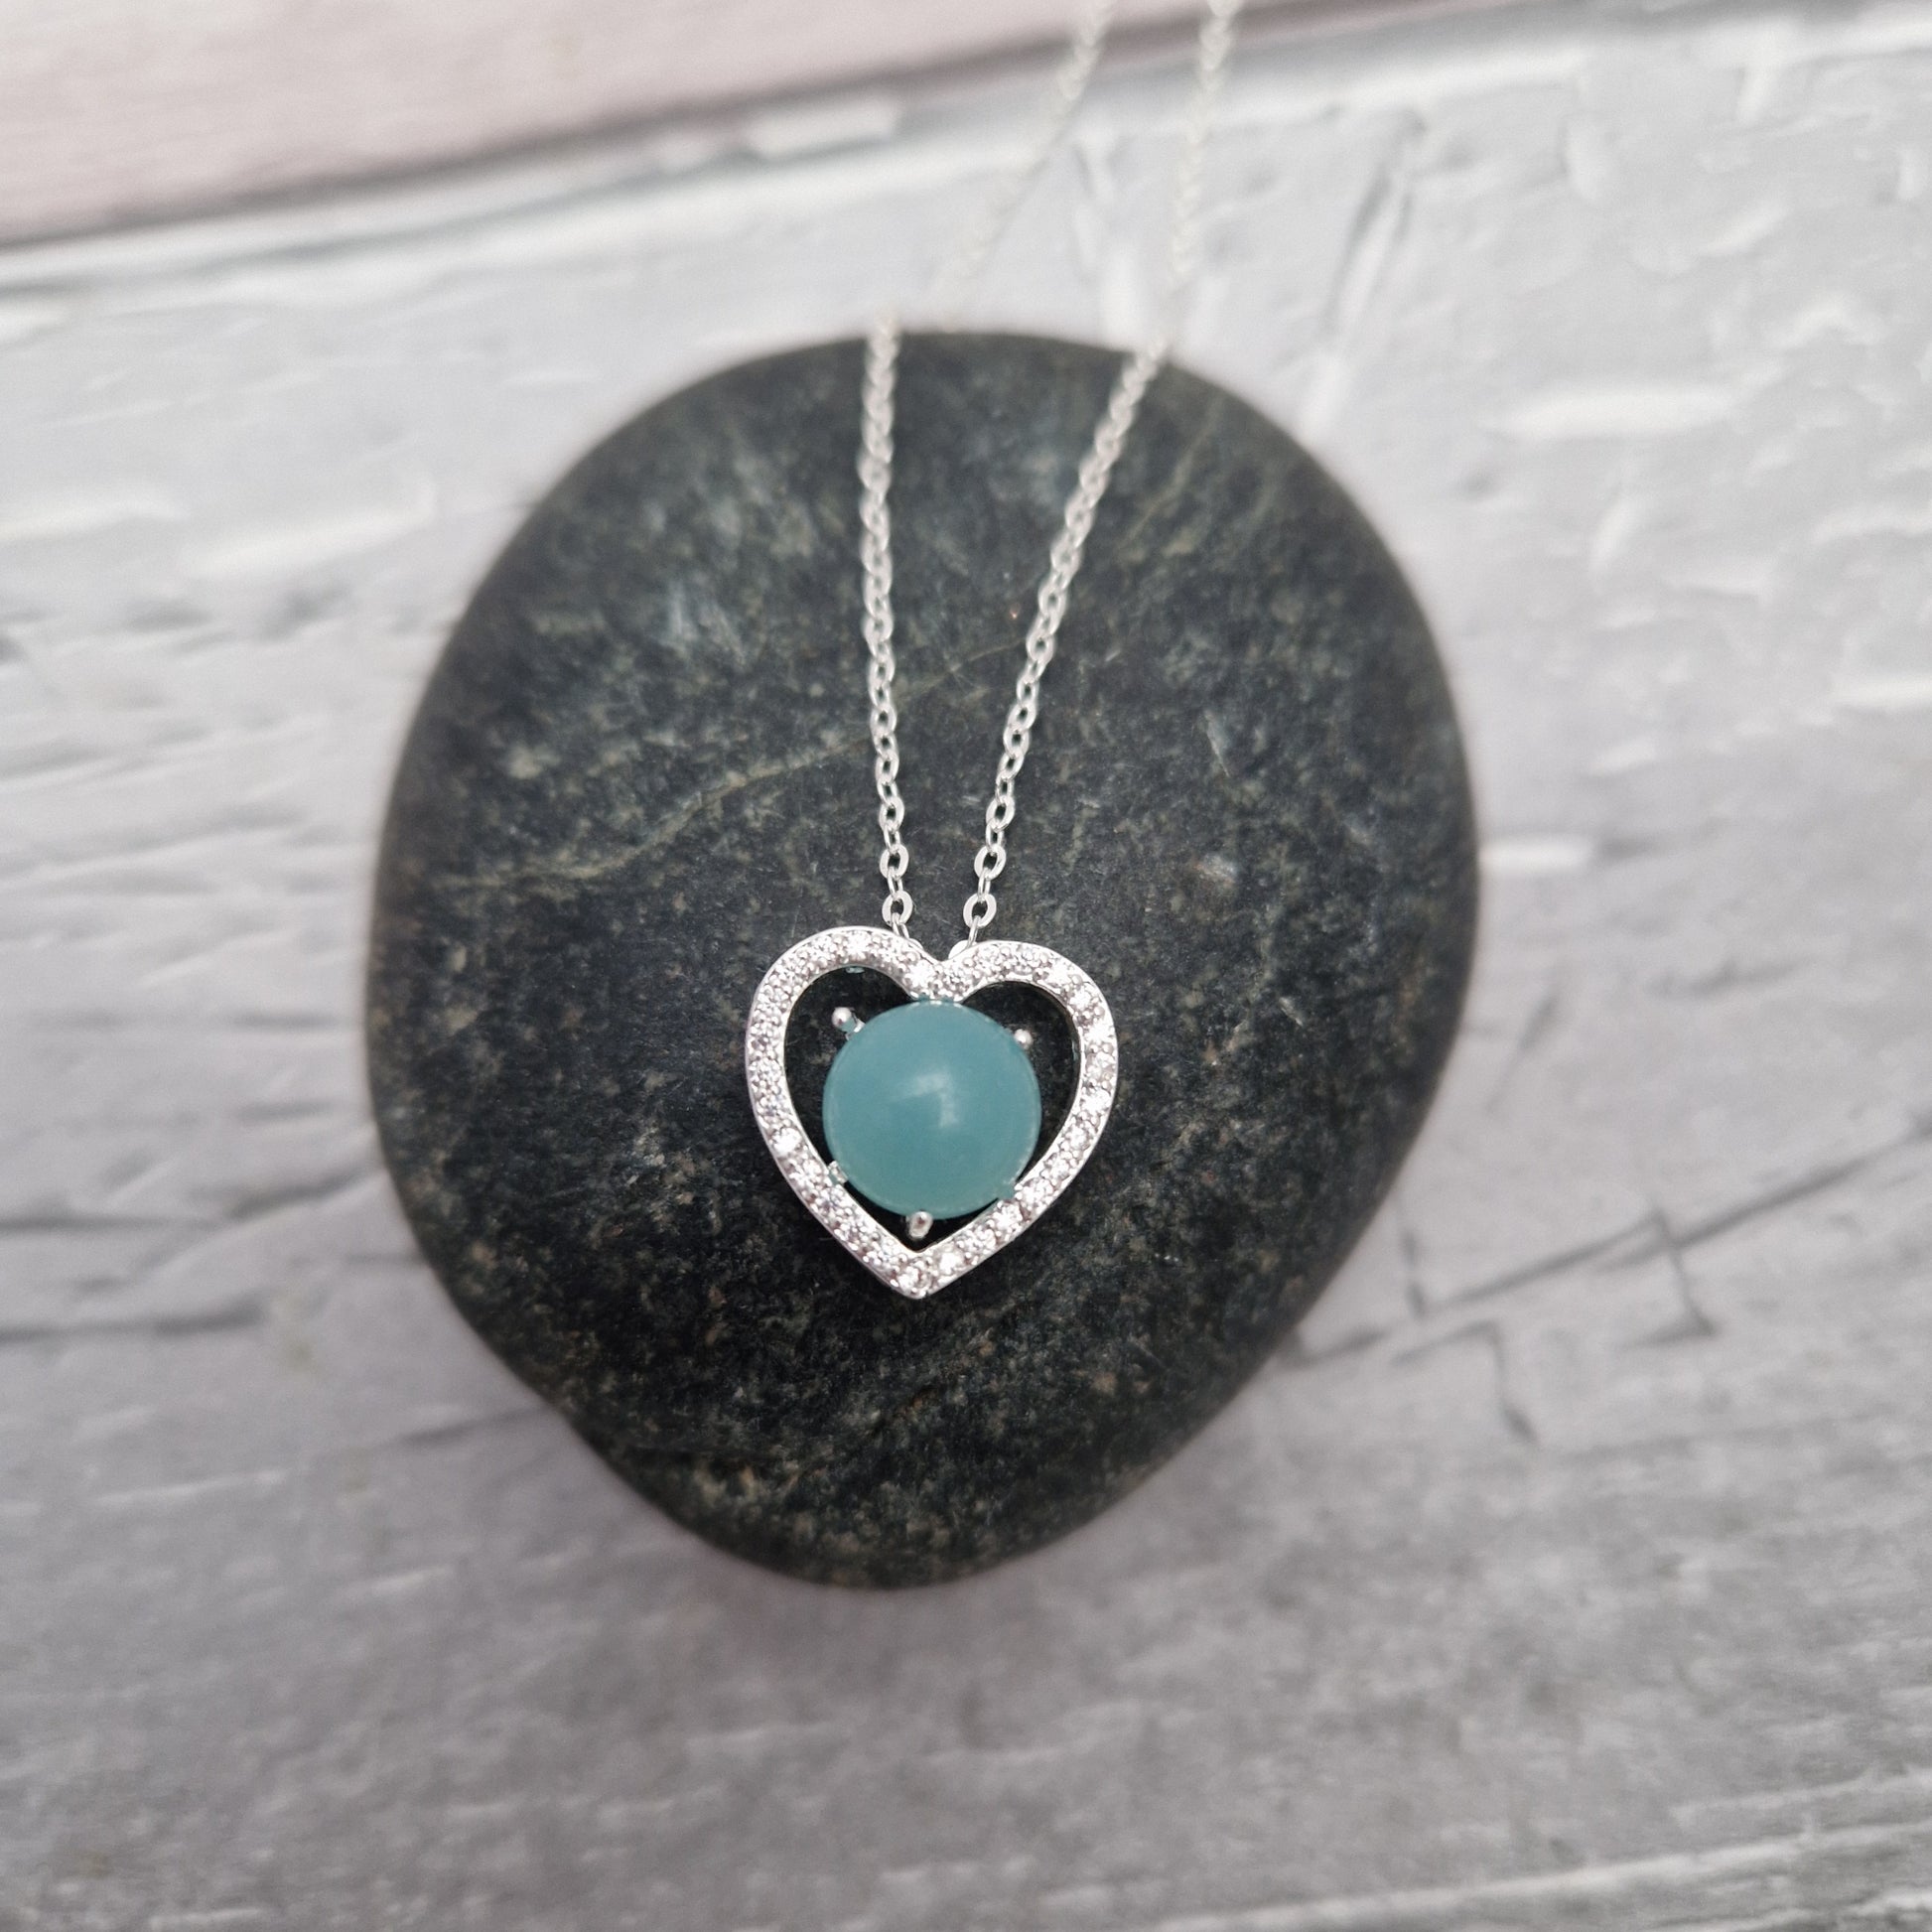 Love heart pendant set with an Amazonite crystal.